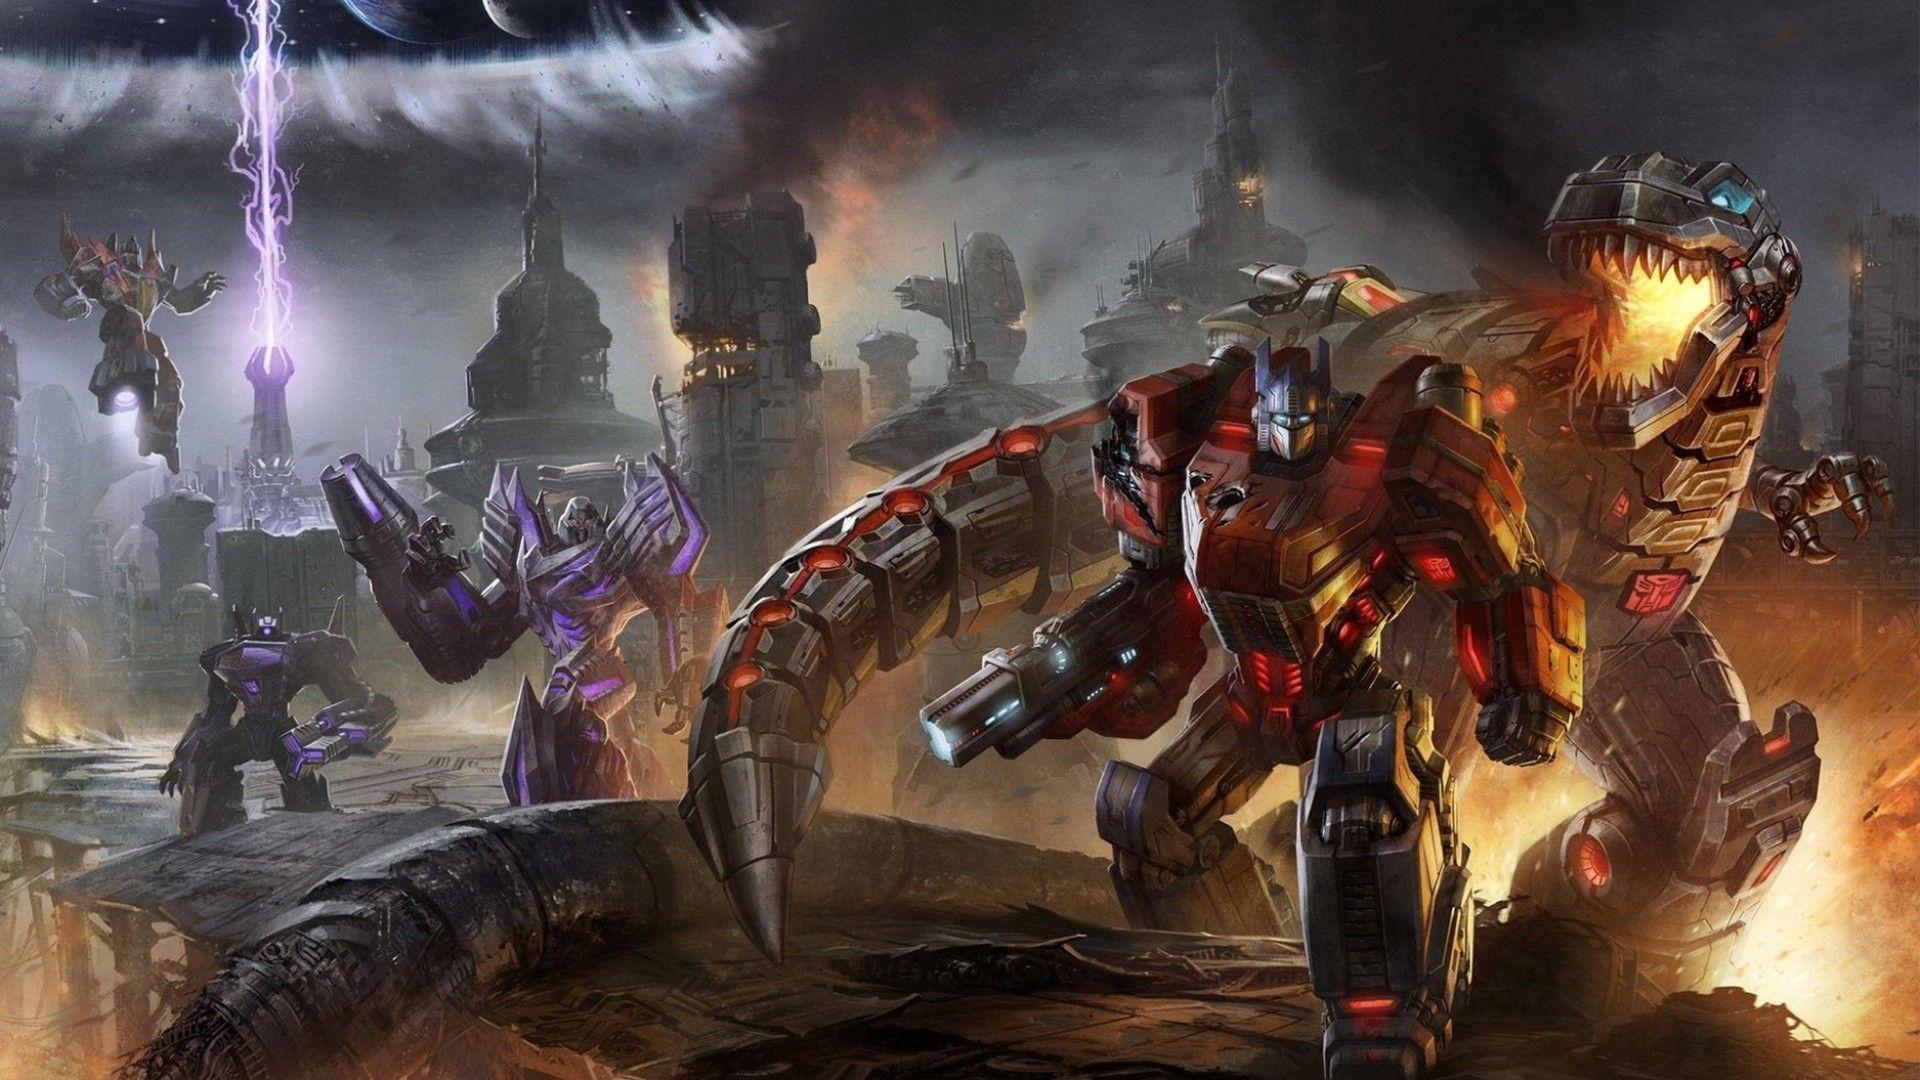 Scene in the game Transformers wallpaper and image